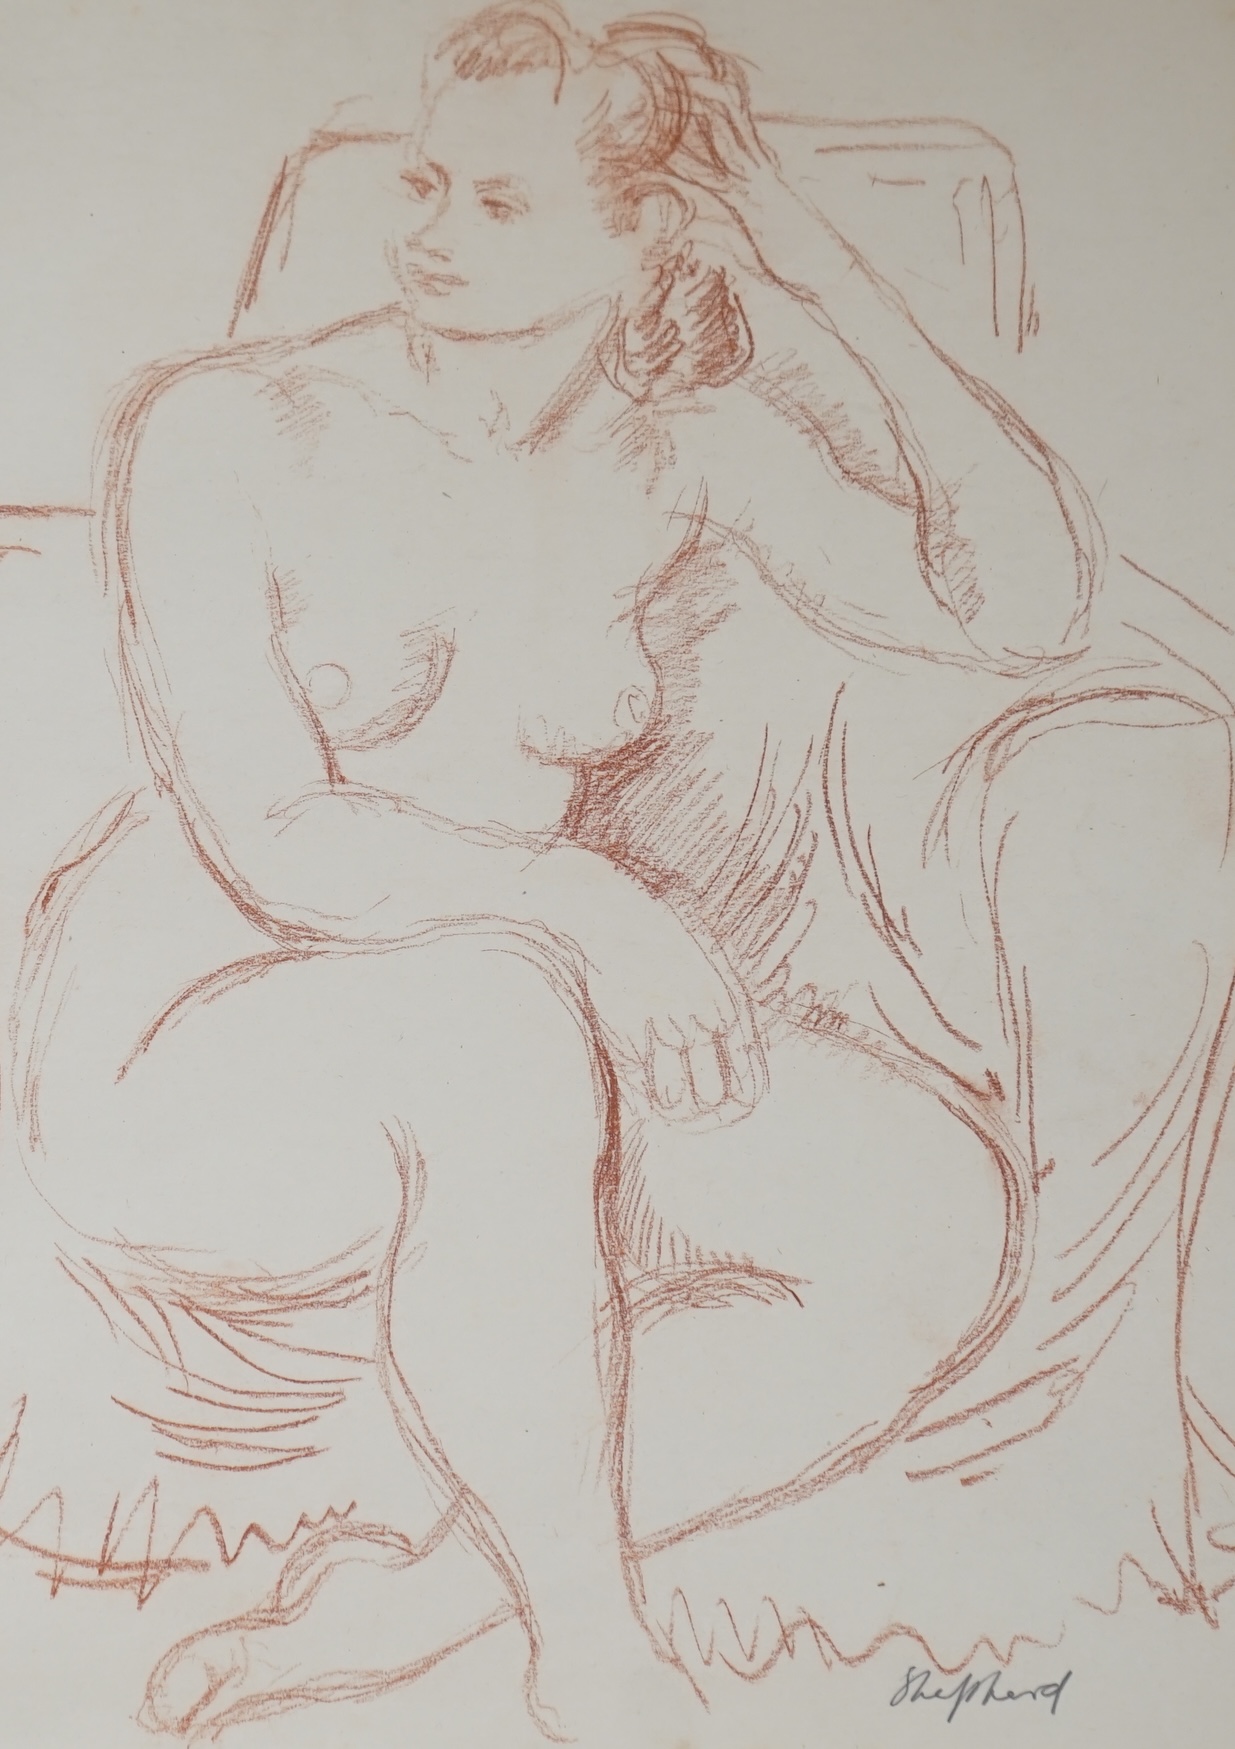 Sidney Horne Shepherd (1909–1993), sanguine chalk, Study of a seated nude woman, signed, 36 x 26cm. Condition - fair to good